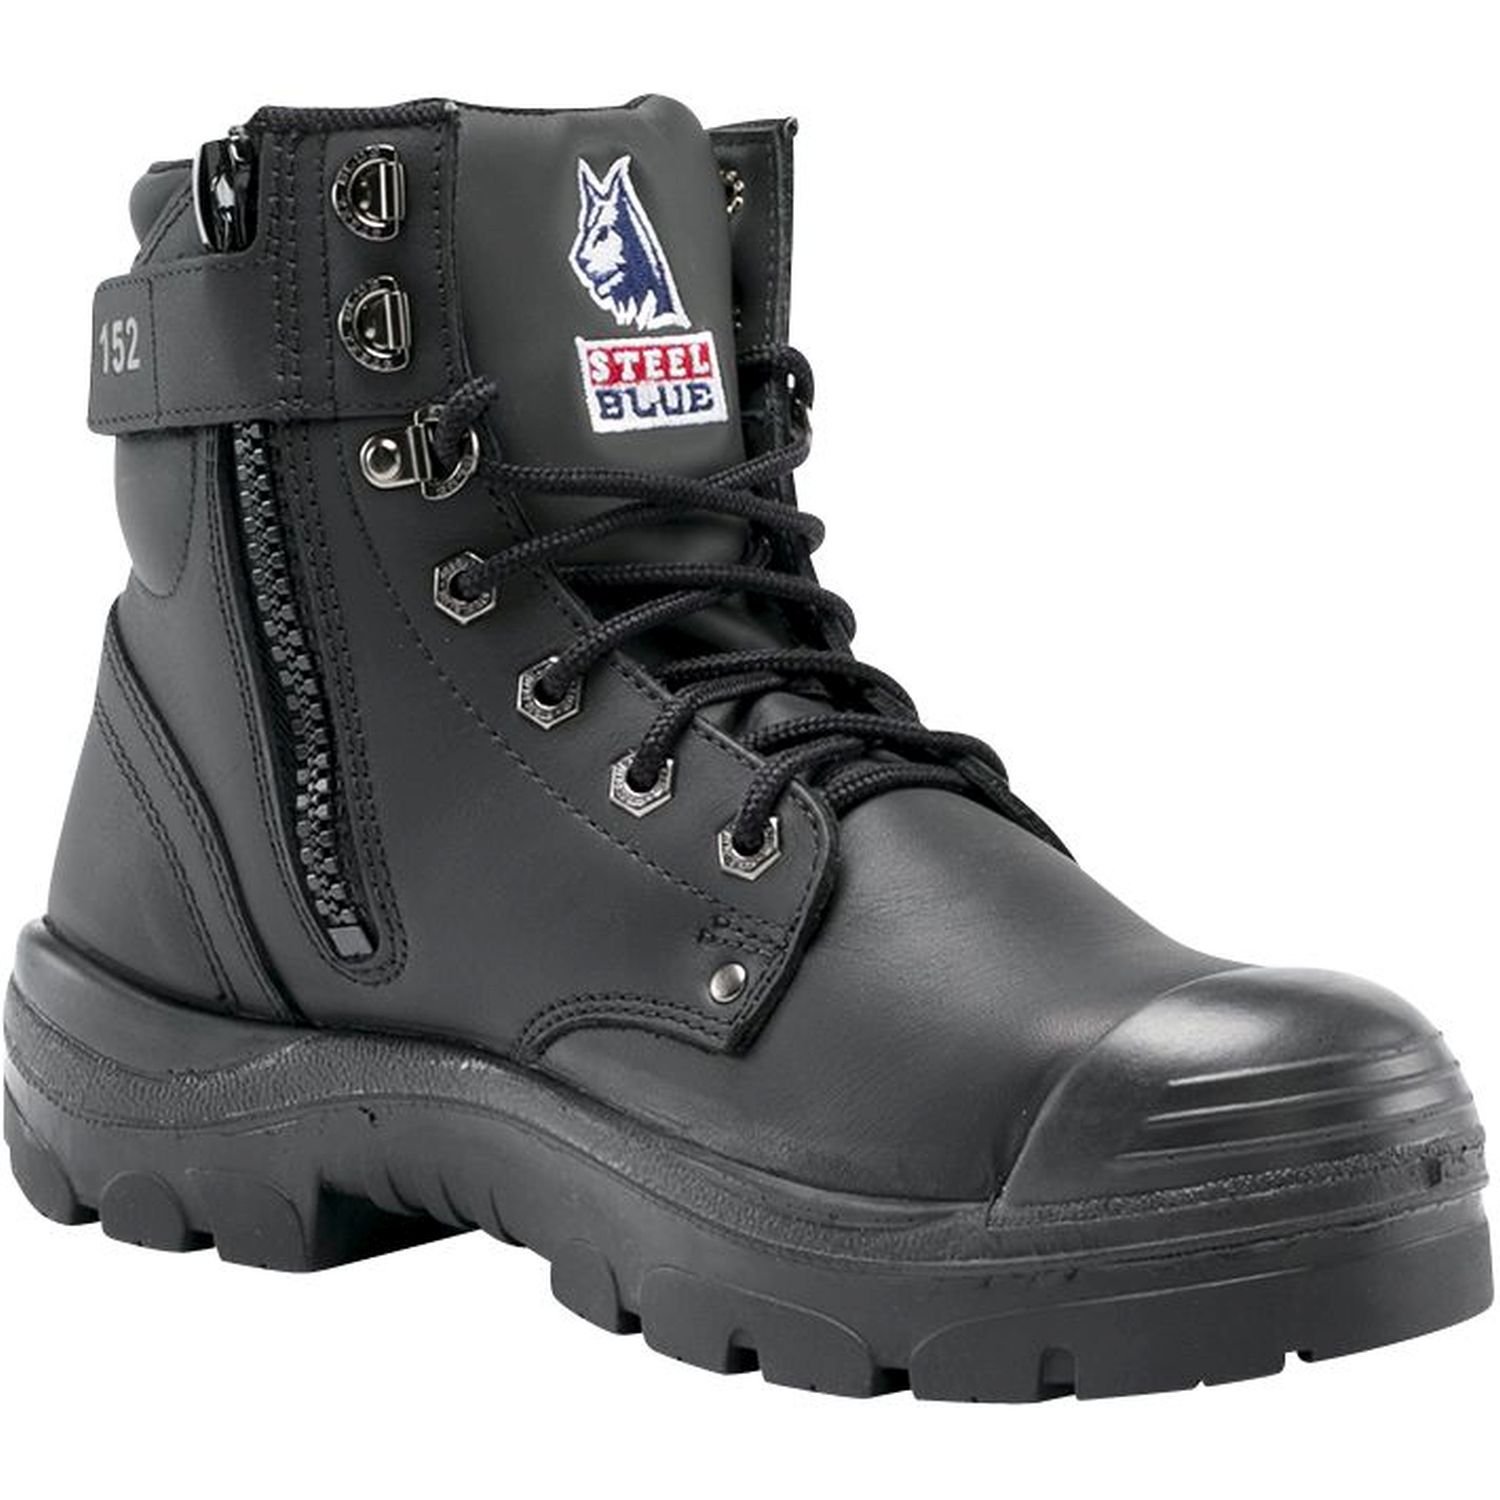 Steel Blue Argyle Lace Up/Zip Safety Boot with Bump Cap Black